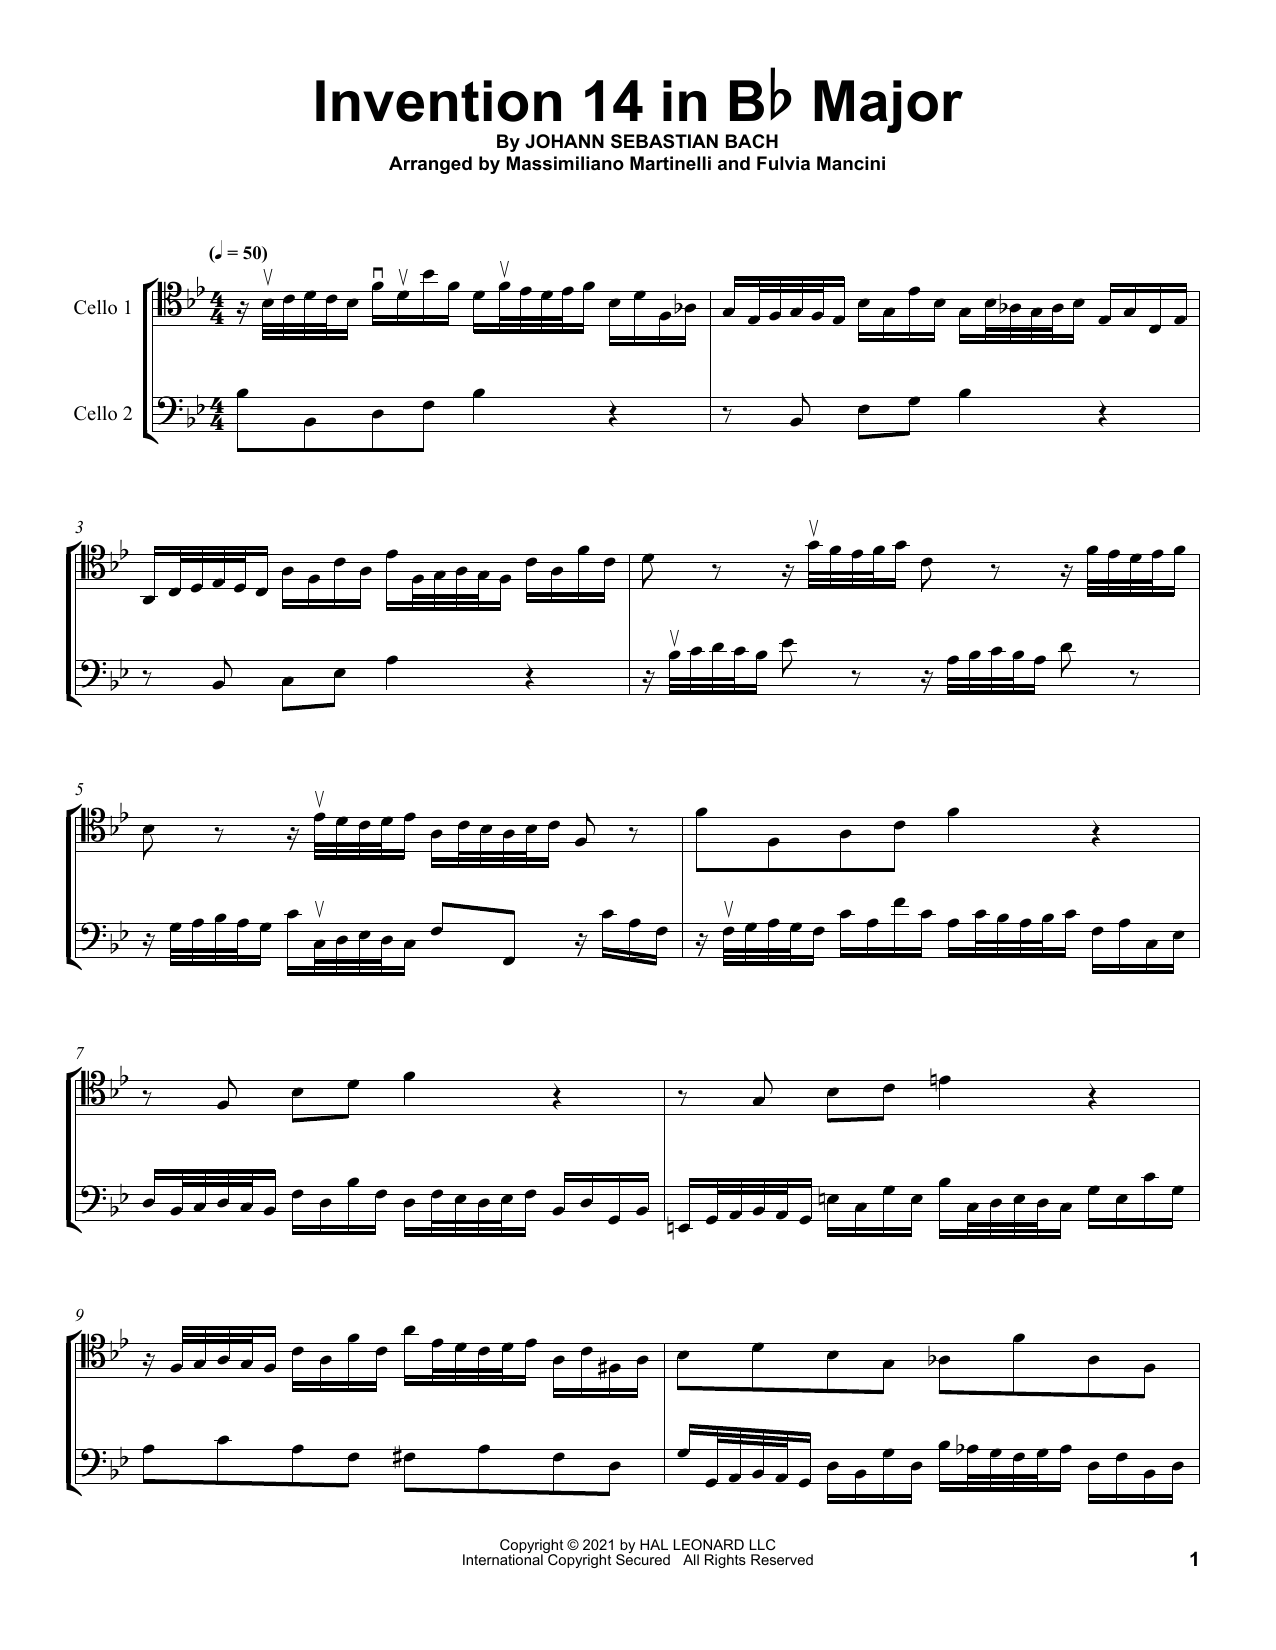 Download Mr & Mrs Cello Invention 14 In B-Flat Major Sheet Music